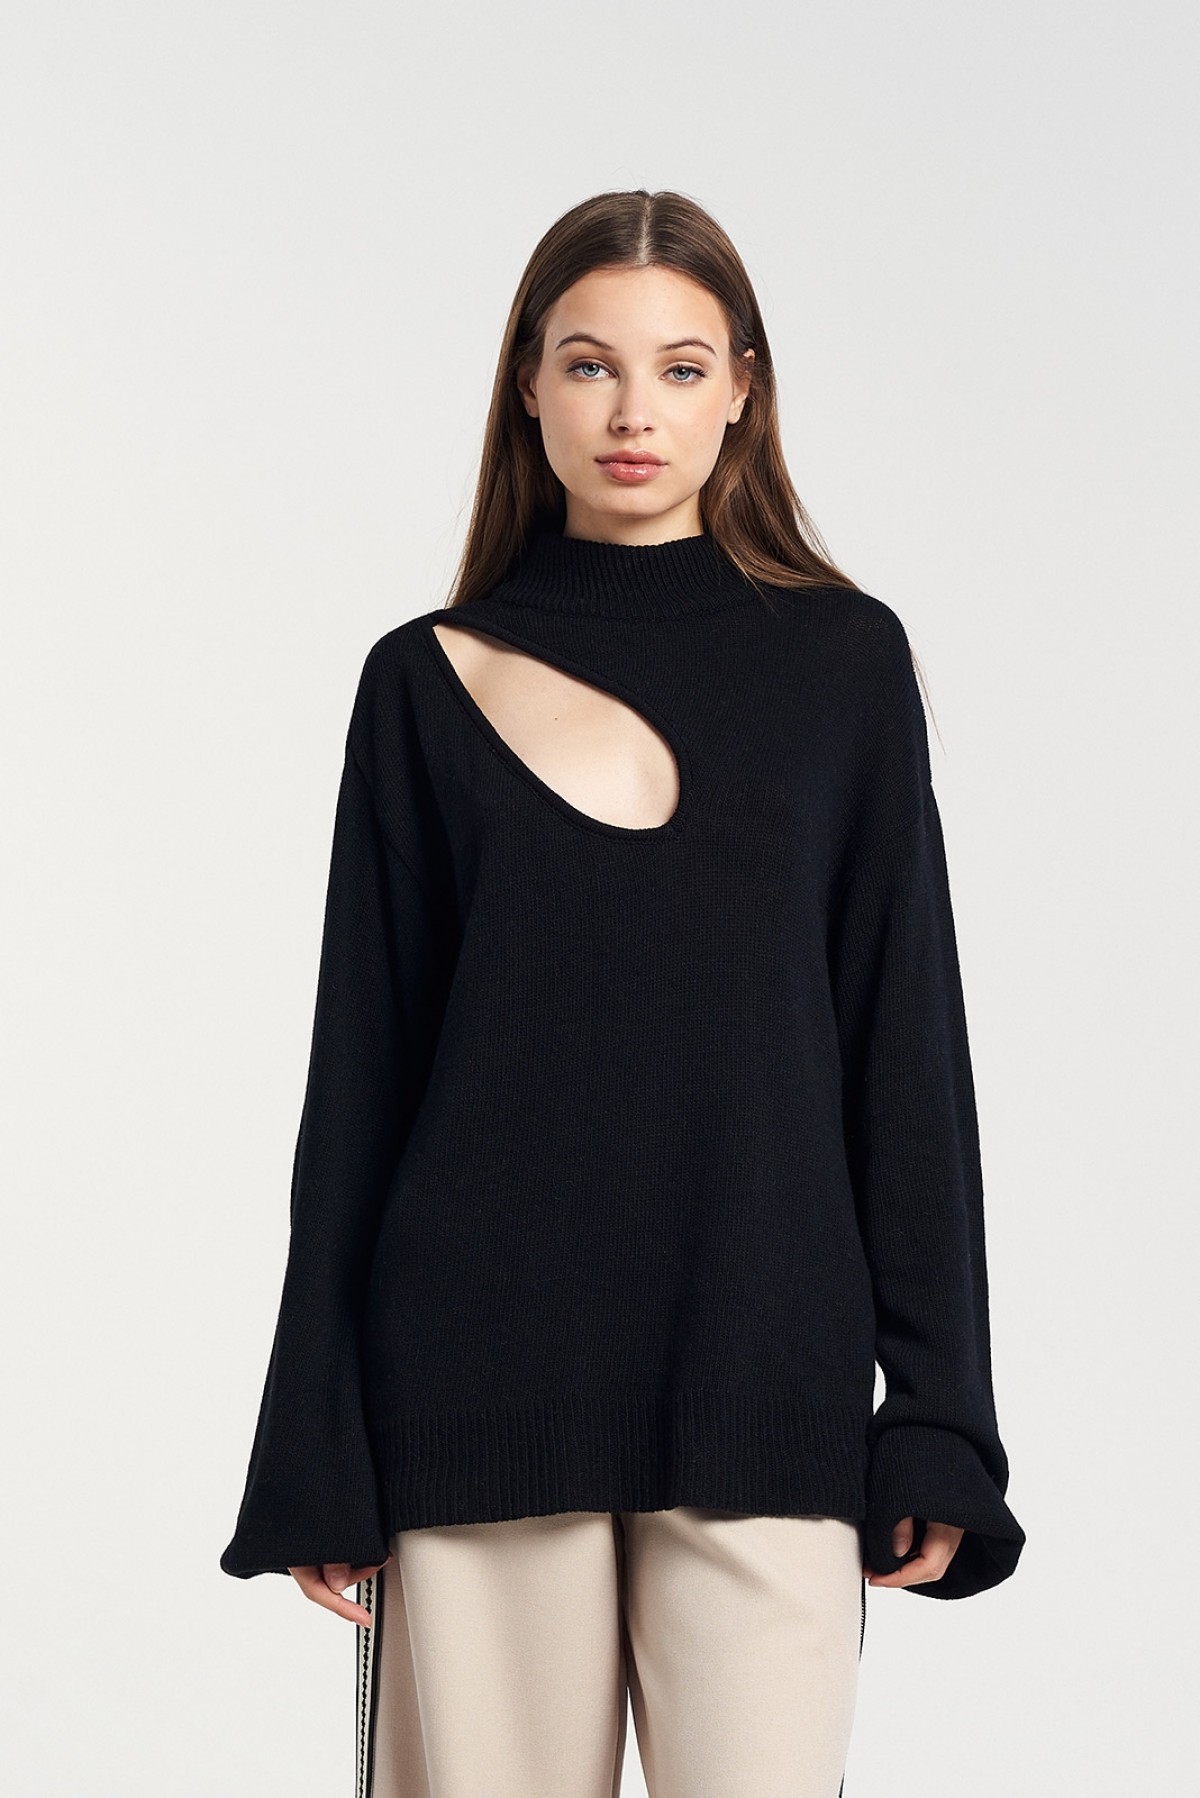 CHRISTELLE NIMA CASHMERE BLEND CUT OUT SWEATER IN BLACK